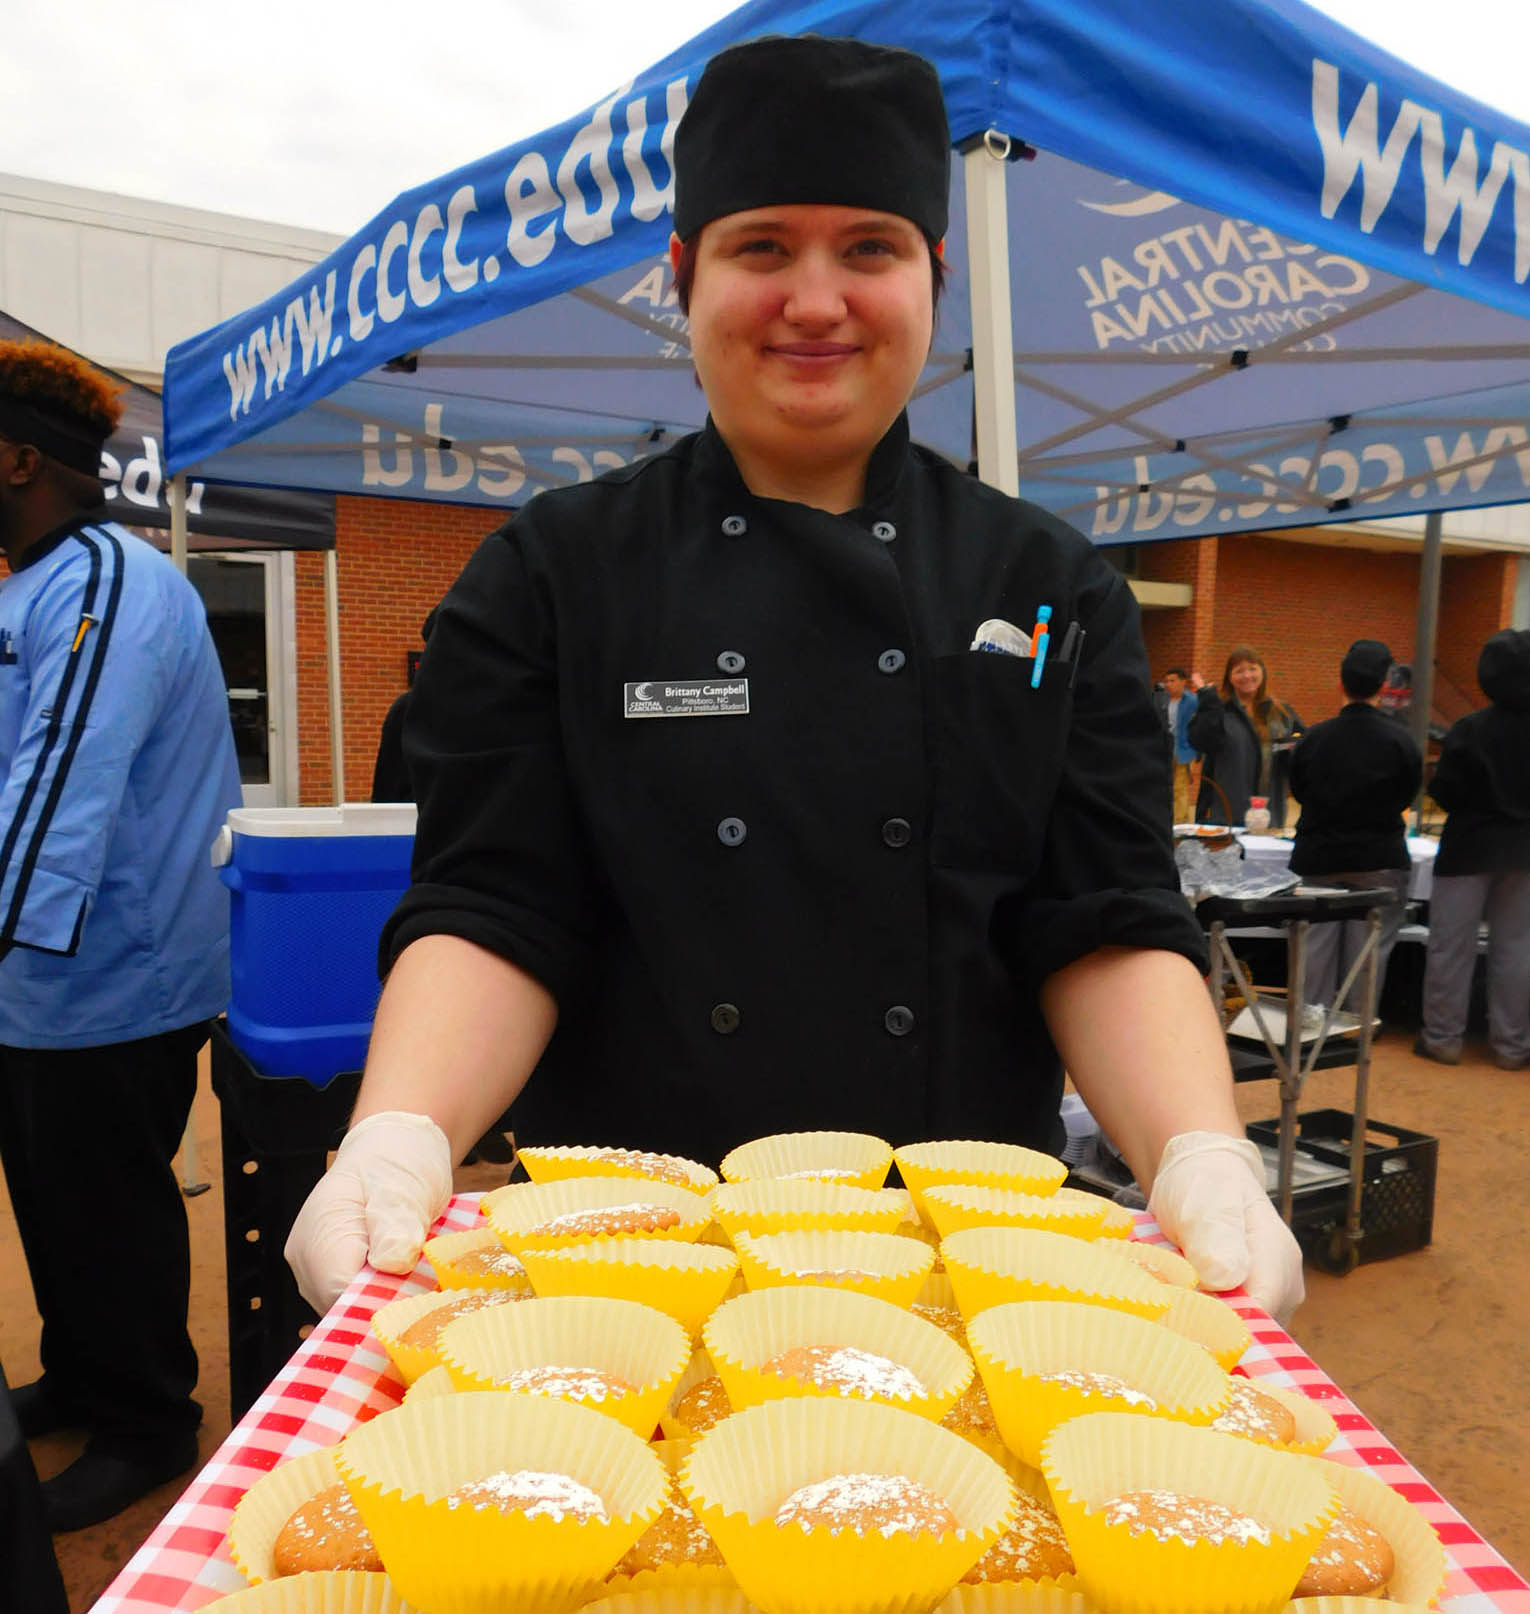 Click to enlarge,  Brittany Campbell, of Pittsboro, with her Banana Pudding Whoopie Pies with Caramel Filling was the People's Choice Award second-place winner at the Central Carolina Community College 3rd Annual Culinary Showcase. The event, featuring dishes by Culinary &amp; Hospitality Arts students represented from Chatham, Harnett, and Lee counties, was held April 11th on the Central Carolina Community College Lee Main Campus in Sanford. For more information on the CCCC Culinary &amp; Hospitality Arts program, visit www.cccc.edu/culinaryarts/. 